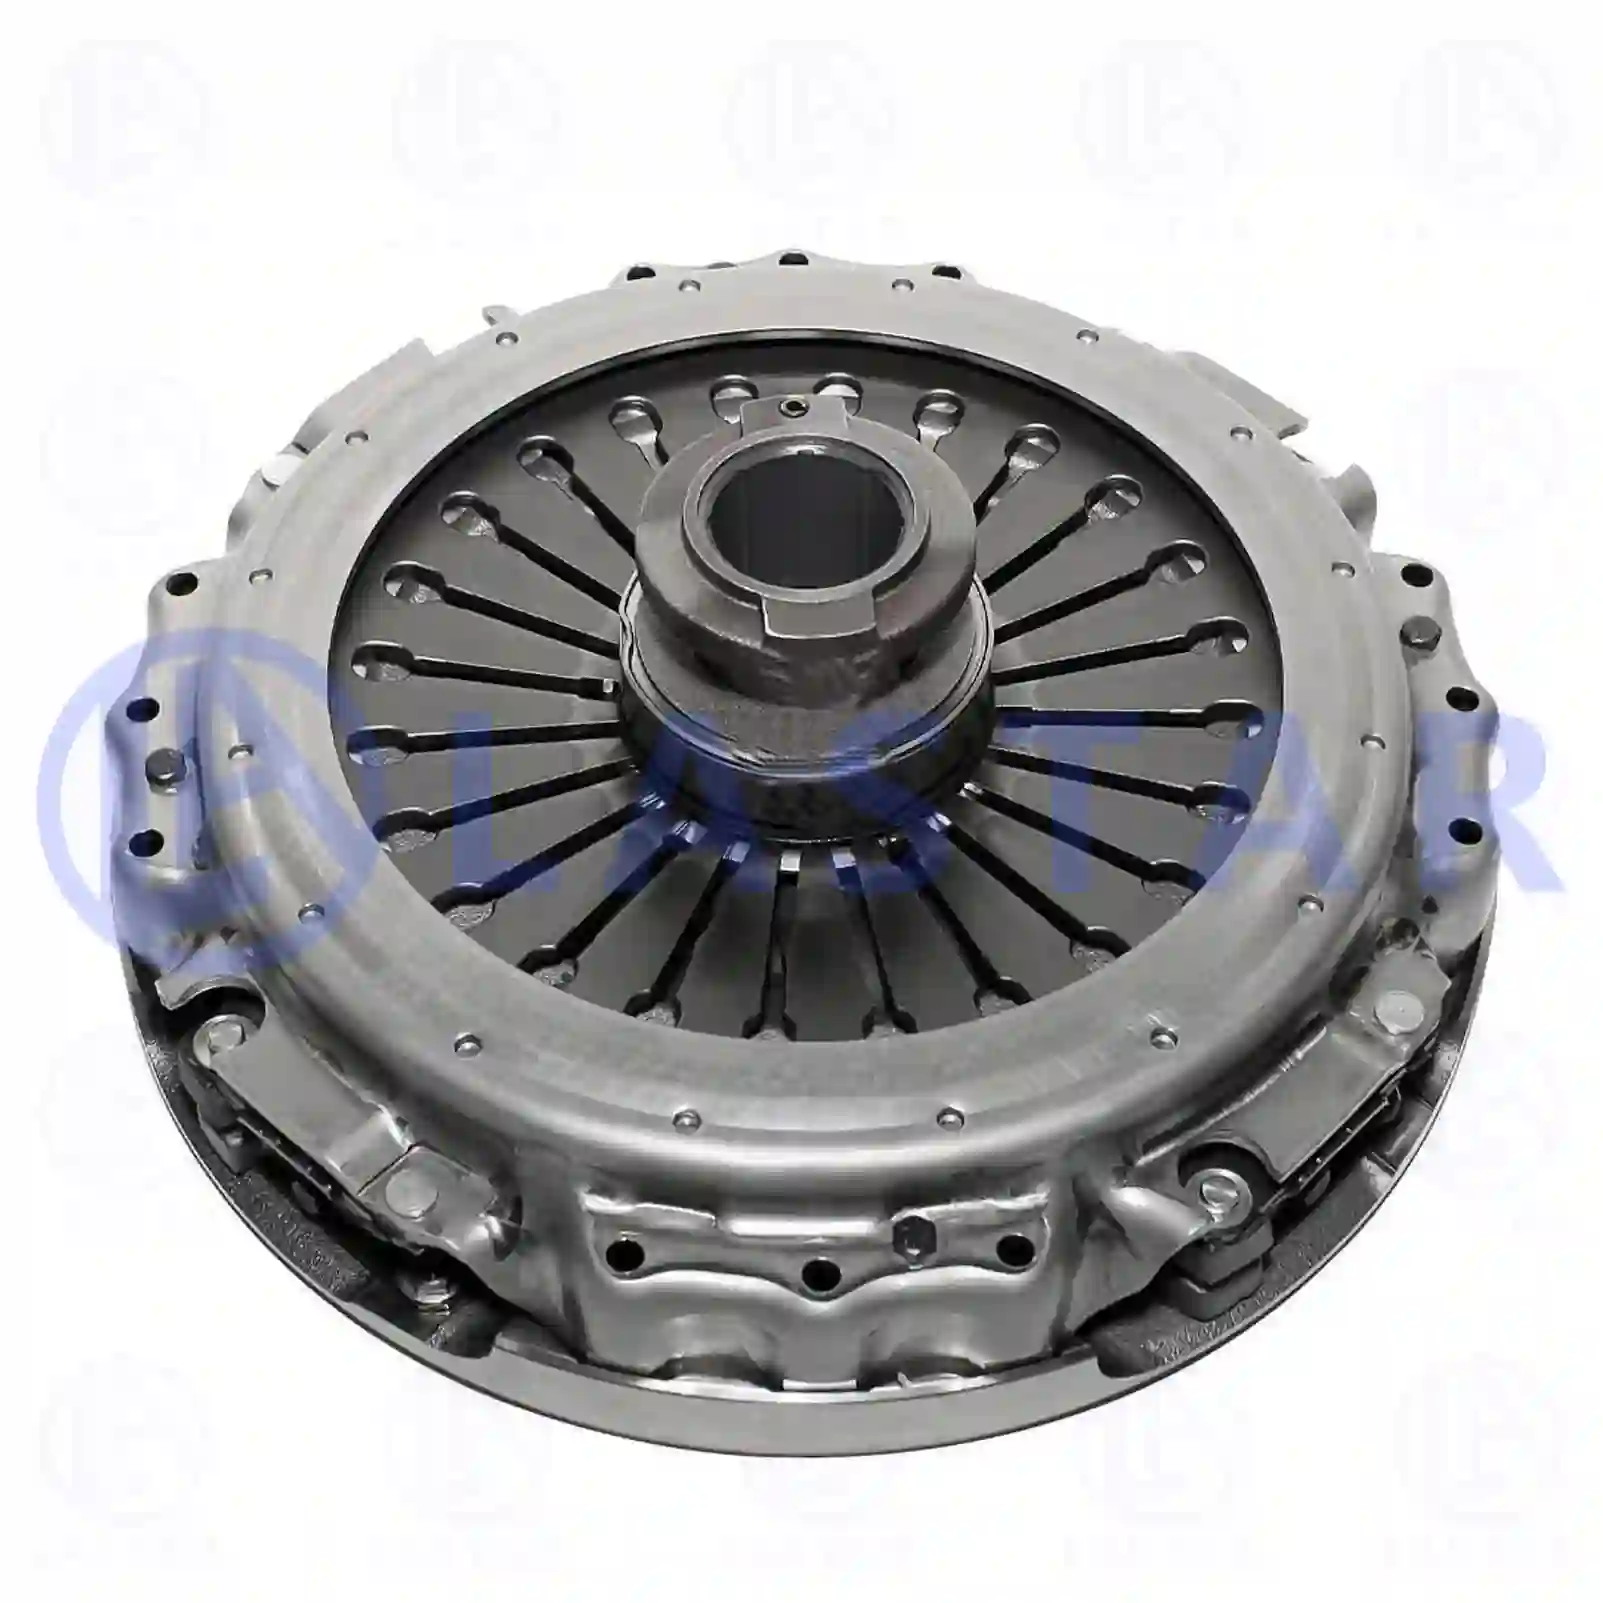 Clutch cover, with release bearing, 77722441, 0062504704, 0062504804, 0062504904, 0062507404, 0062508604, 0062508704, 0062508804, 0072502804, 0072502904, 0072503004, 0072503204, 0072503304, 0072503404, 0072503504, 0072504404, 0072504704, 0072505104, 007250510480, 0072508204, 0082501004, 0082501304, 0082501904, 0082503504, 0082503604, 0082503804, 0082503904, 0082504204, 0092500504, 0092501204, 0092501404, 0092501504, 0092501604, 0092502304, 0092502504, 0092508504, 0102501304, 0102501504, 0102501704, 0192501304 ||  77722441 Lastar Spare Part | Truck Spare Parts, Auotomotive Spare Parts Clutch cover, with release bearing, 77722441, 0062504704, 0062504804, 0062504904, 0062507404, 0062508604, 0062508704, 0062508804, 0072502804, 0072502904, 0072503004, 0072503204, 0072503304, 0072503404, 0072503504, 0072504404, 0072504704, 0072505104, 007250510480, 0072508204, 0082501004, 0082501304, 0082501904, 0082503504, 0082503604, 0082503804, 0082503904, 0082504204, 0092500504, 0092501204, 0092501404, 0092501504, 0092501604, 0092502304, 0092502504, 0092508504, 0102501304, 0102501504, 0102501704, 0192501304 ||  77722441 Lastar Spare Part | Truck Spare Parts, Auotomotive Spare Parts